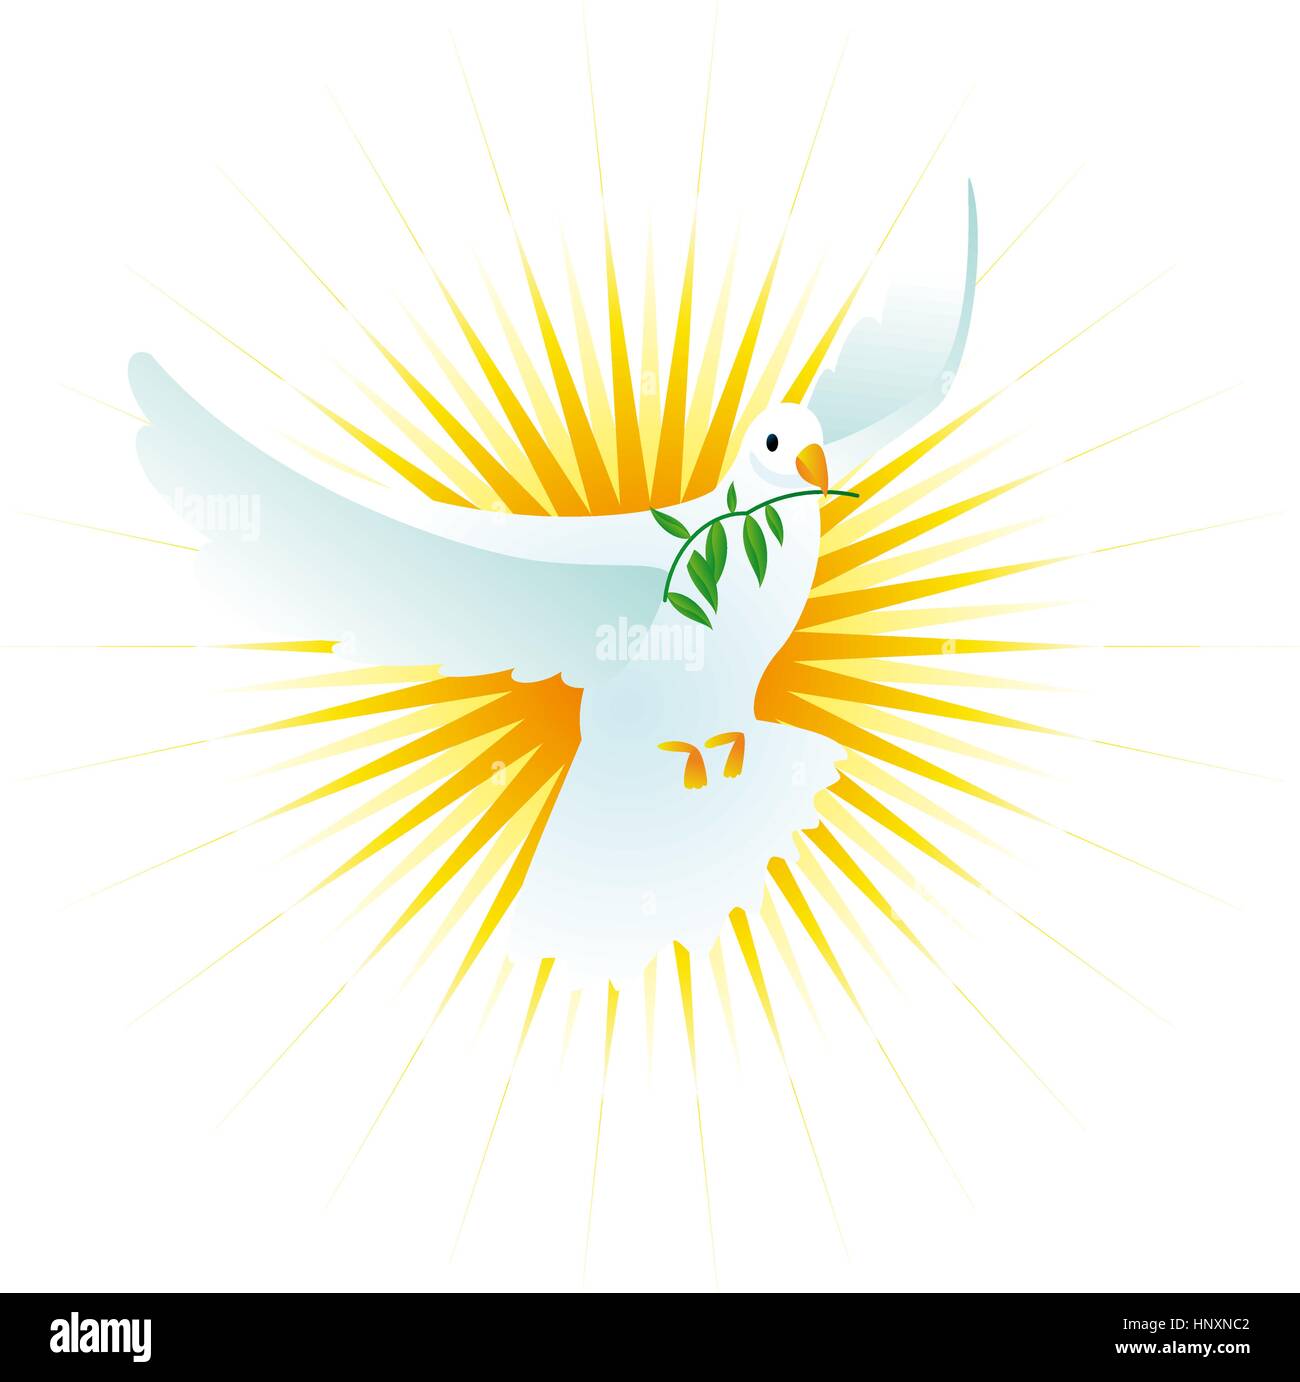 The peace holy spirit dove, realistic illustration, can be used with religious purposes too. Stock Vector